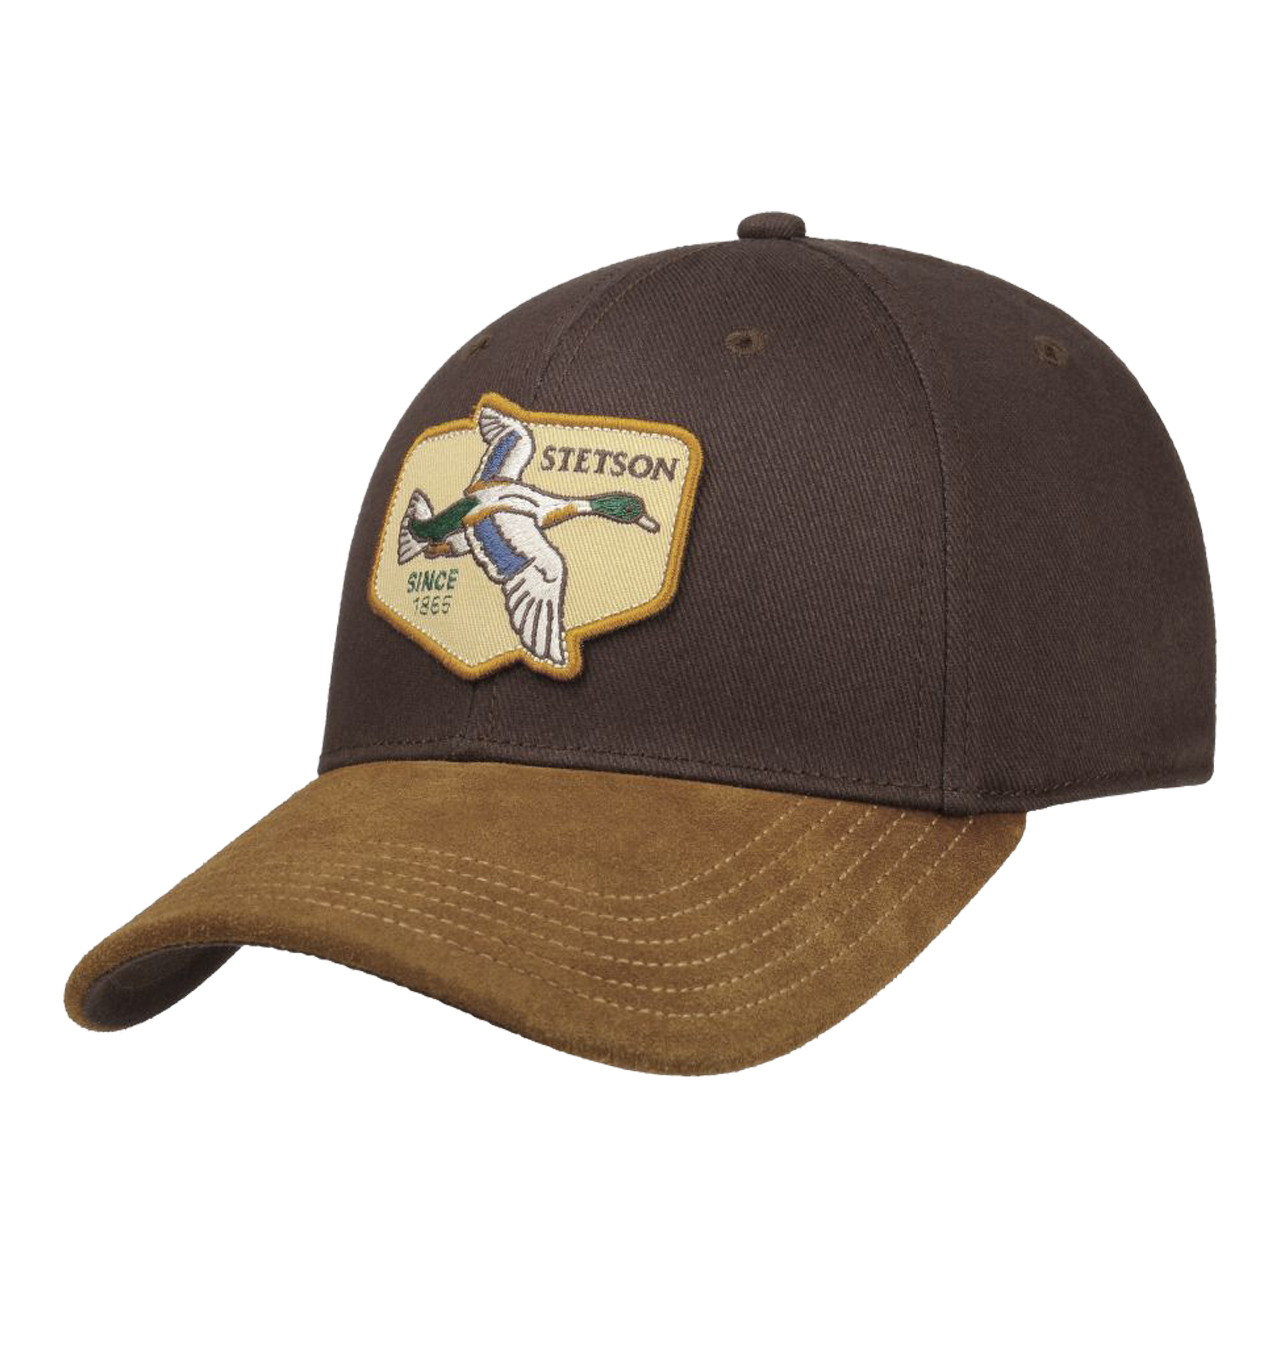 Stetson - Duck Cap with Leather Visor - Brown